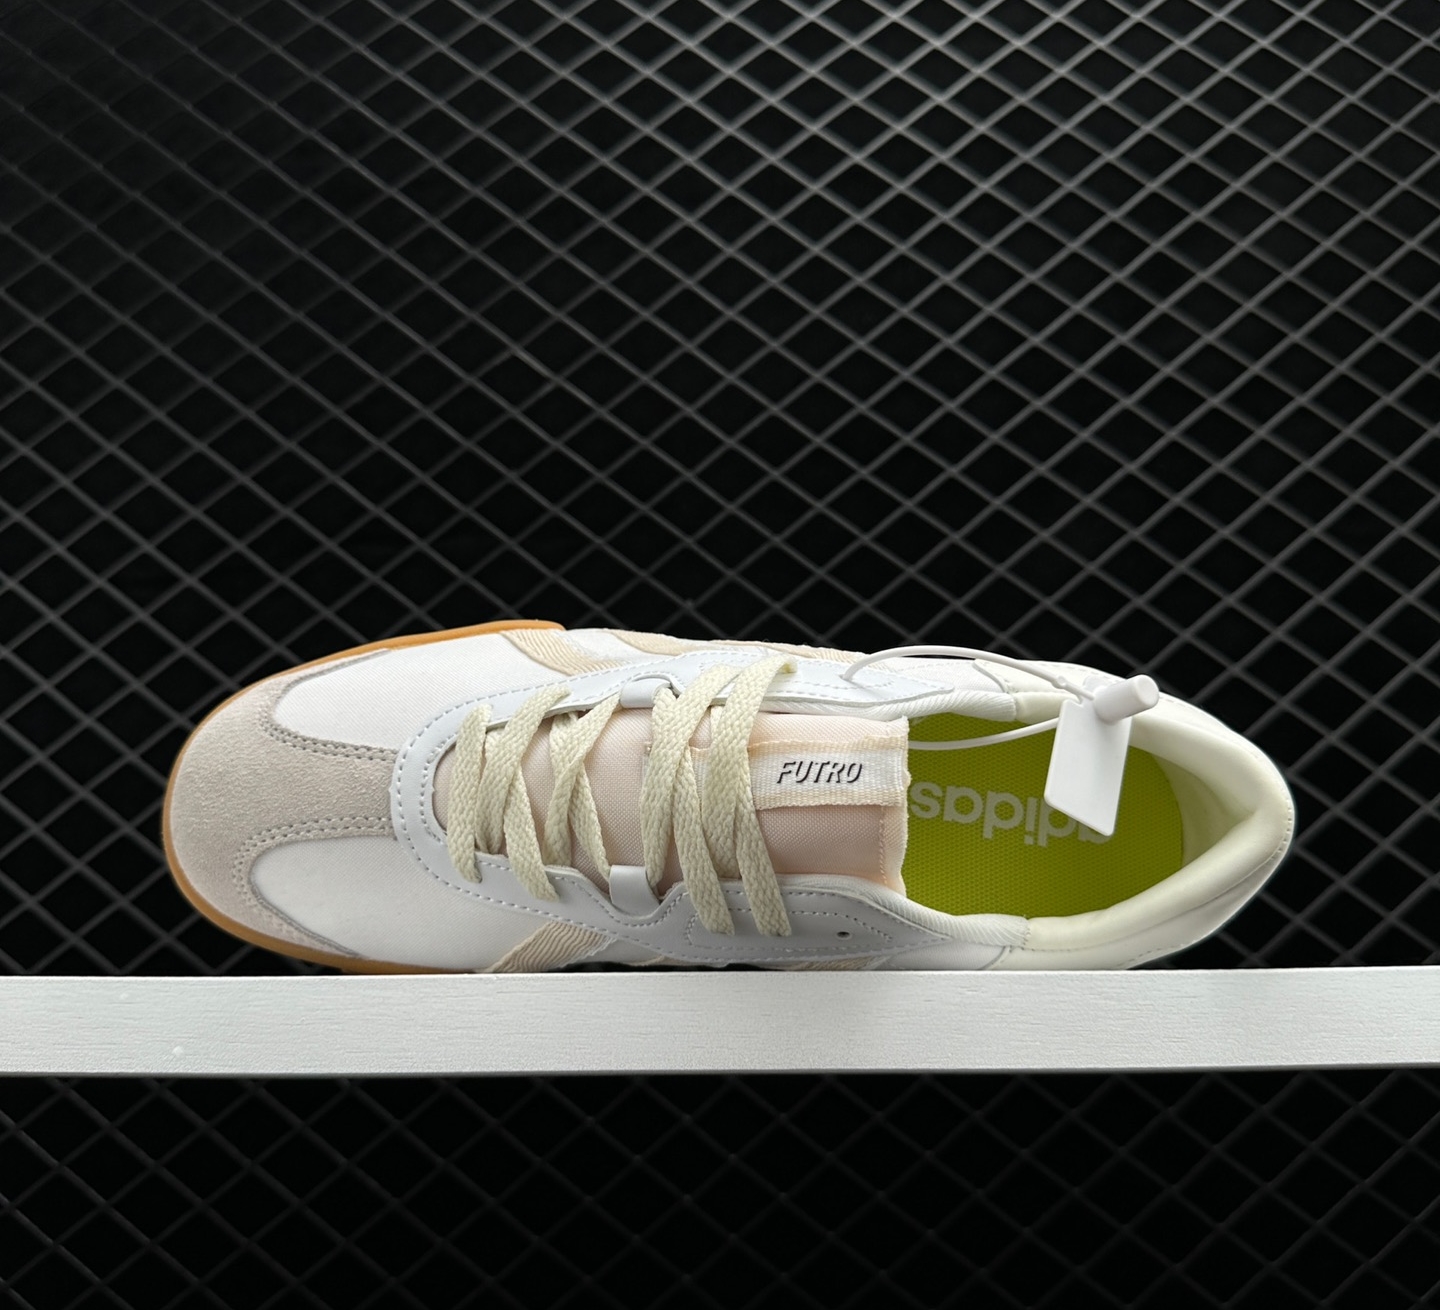 Adidas Futro Mixr 'White Gum' GY4734 - Stylish Sneakers for Ultimate Comfort